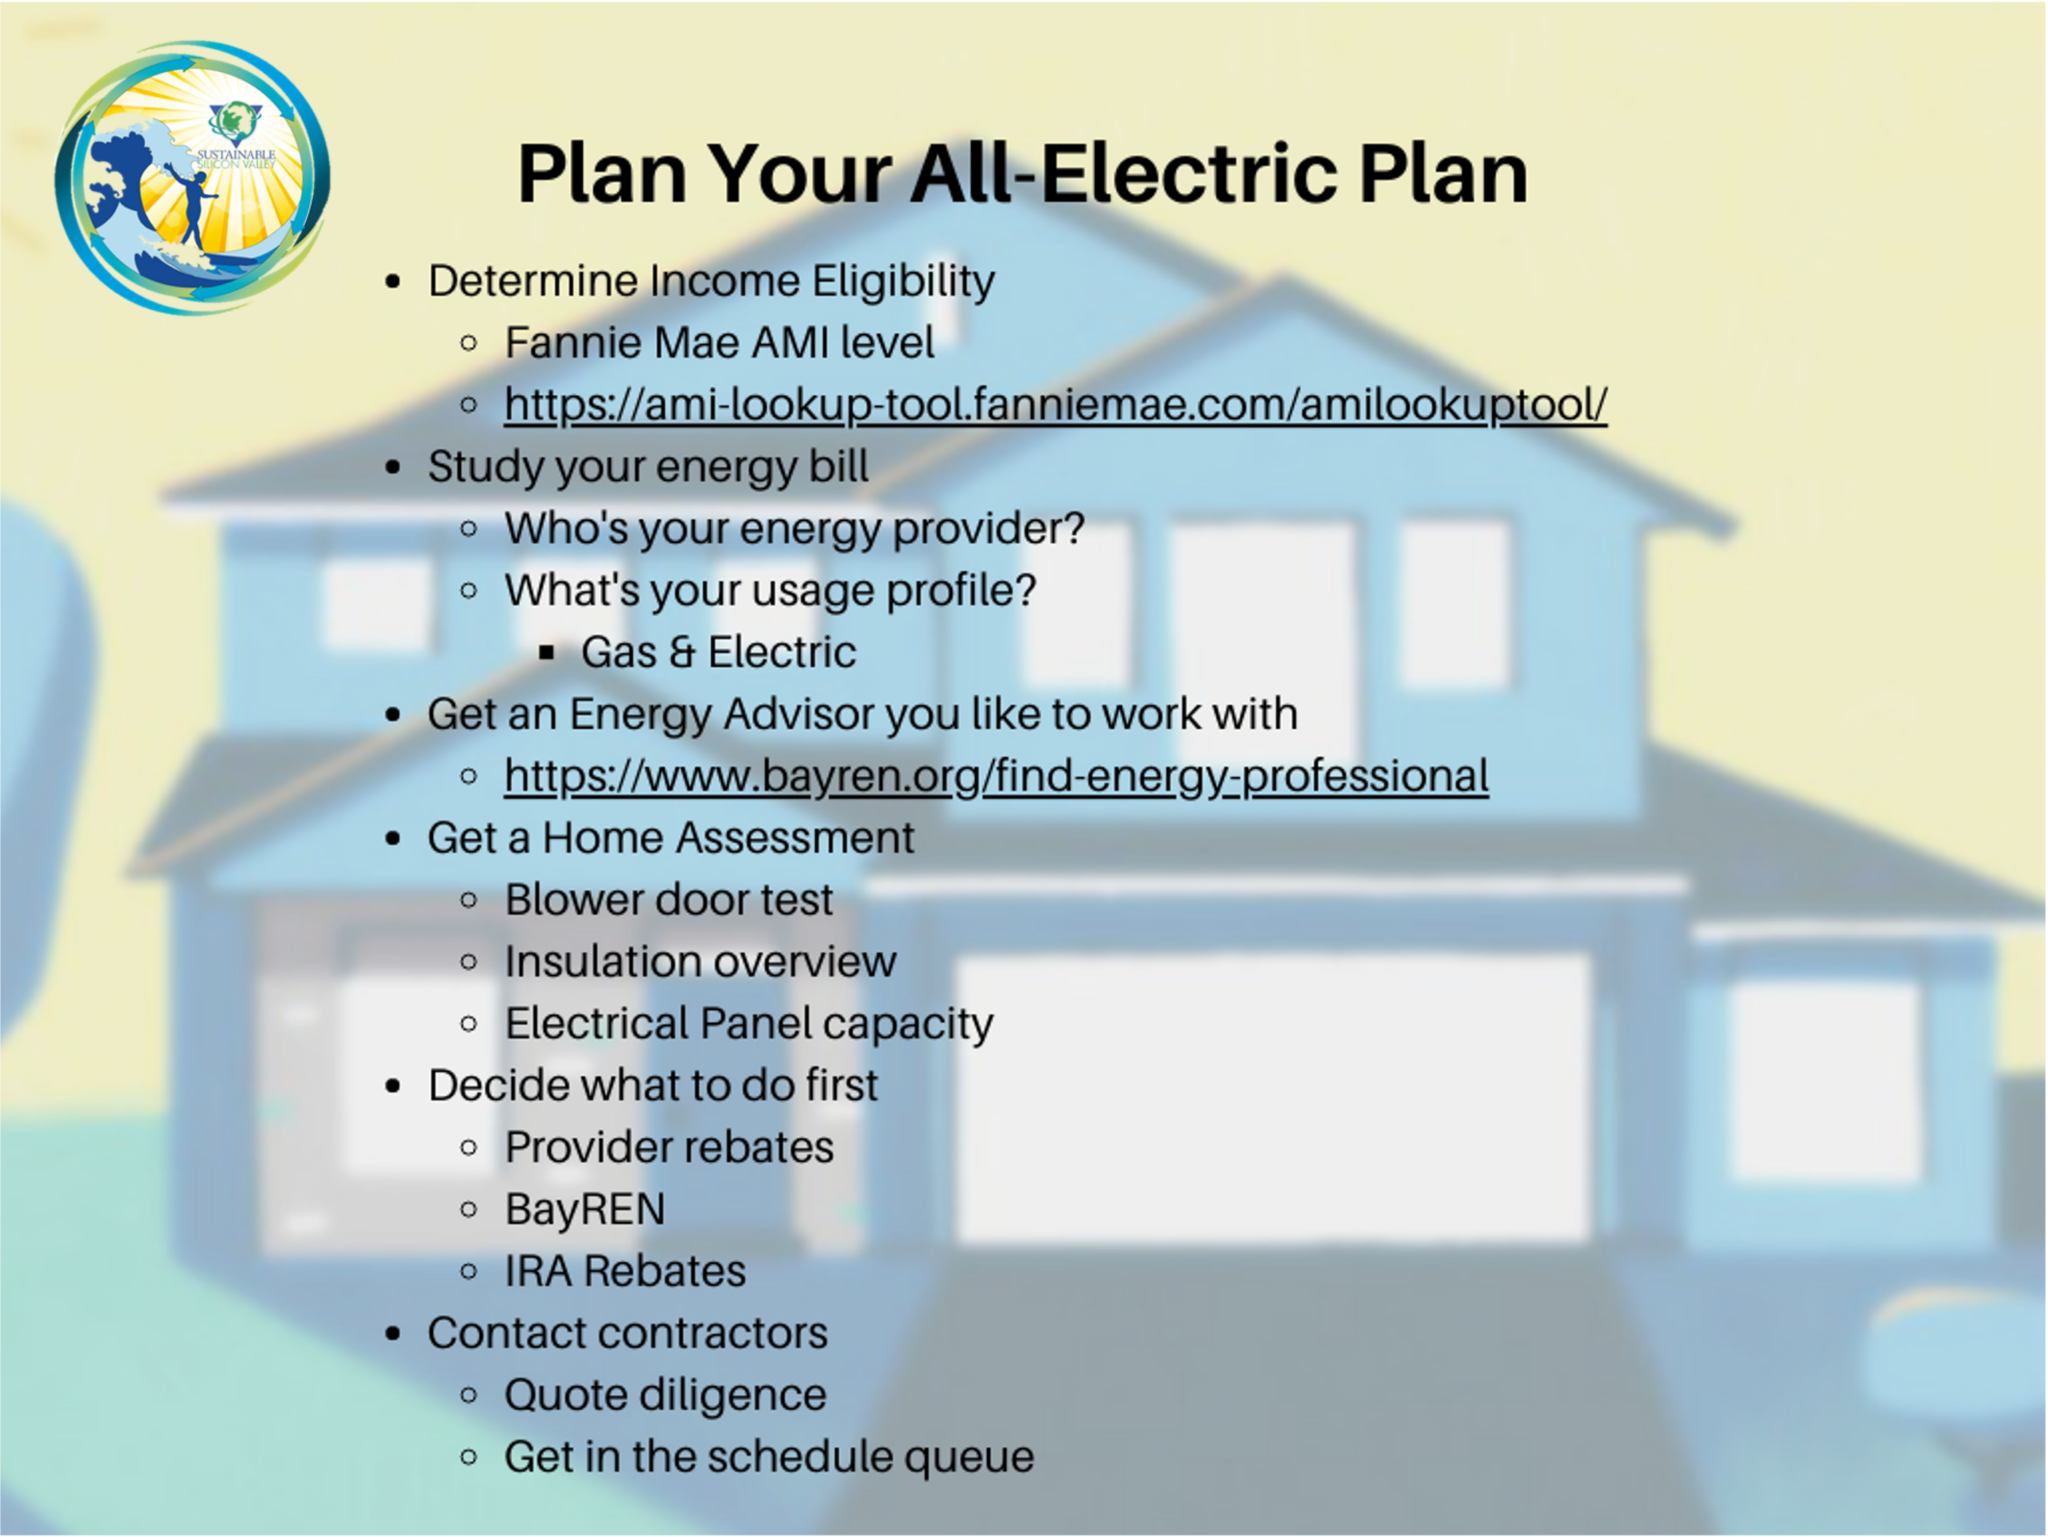 earth-month-resolution-start-your-ira-electrification-plan-now